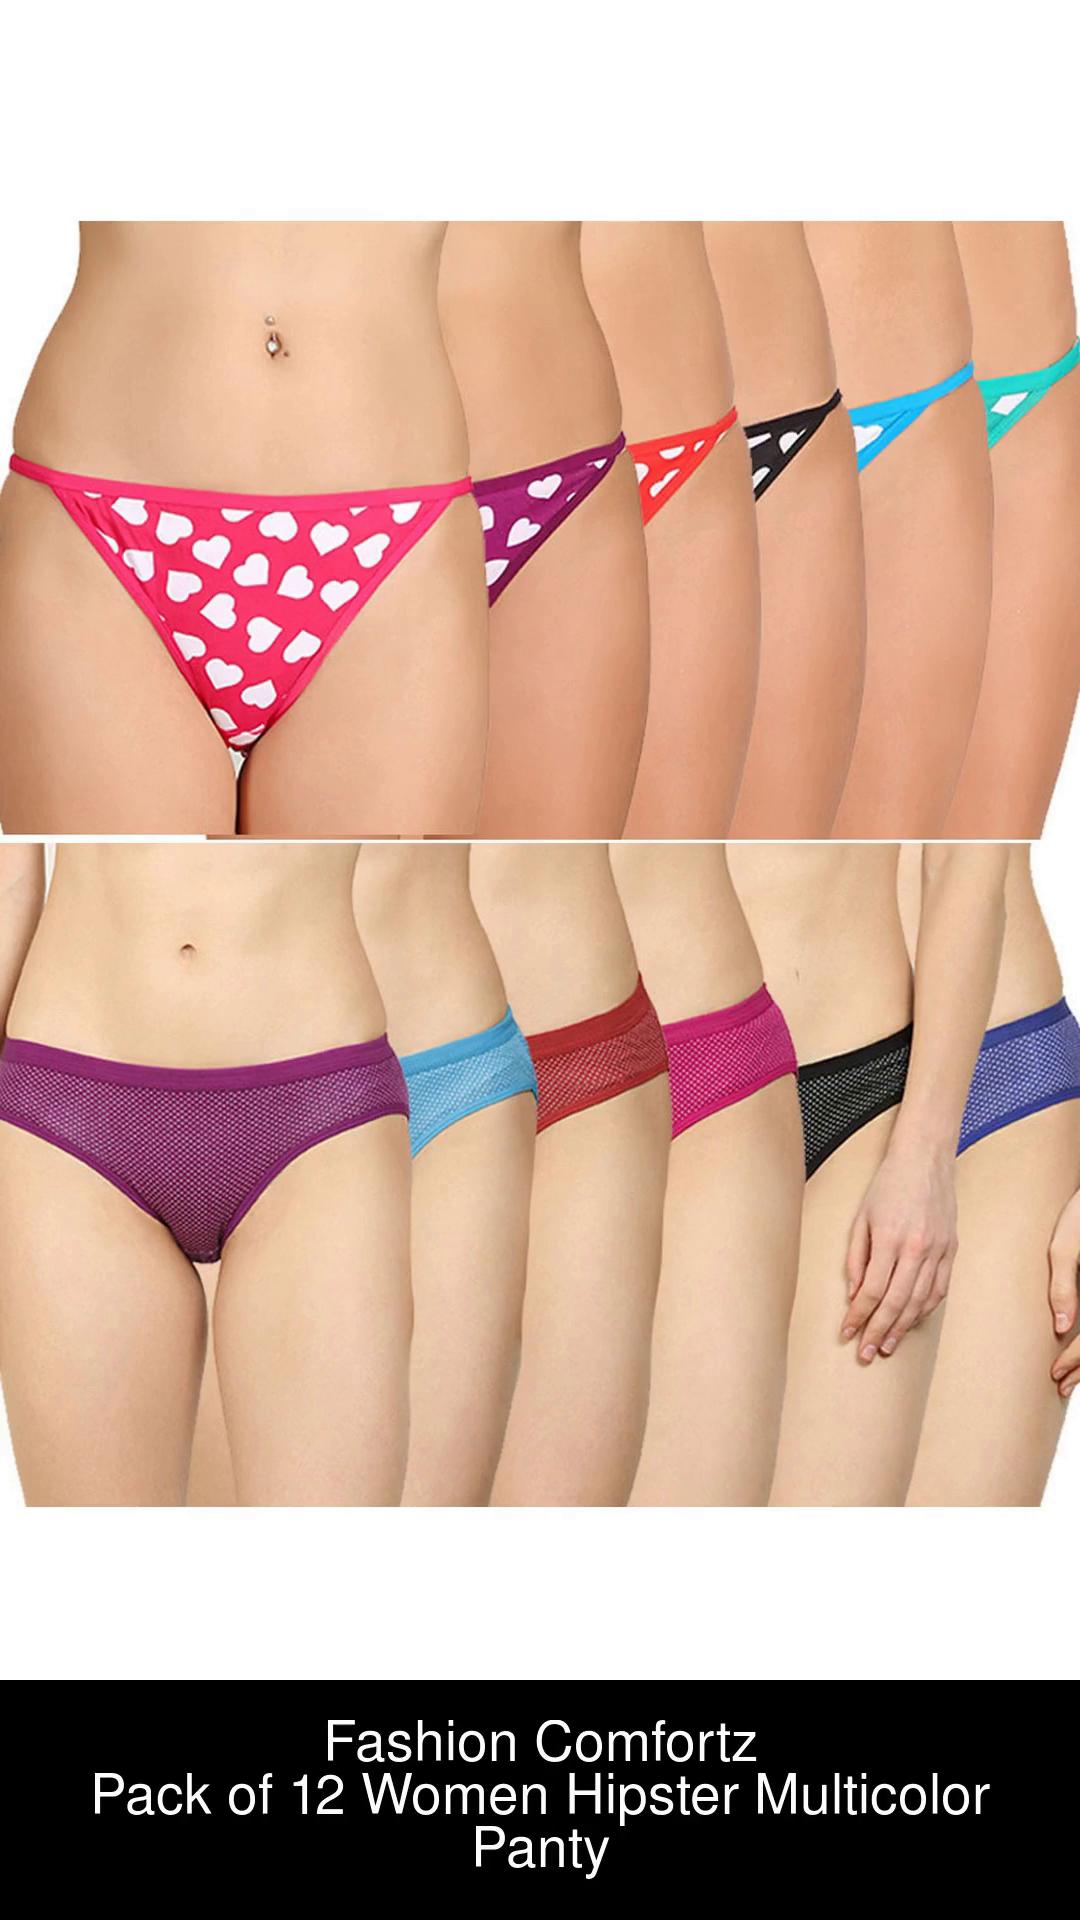 Fashion Comfortz Girls,Ladies,Undergarments,Innerwear for Women Hipster  Multicolor Panty - Buy Fashion Comfortz Girls,Ladies,Undergarments,Innerwear  for Women Hipster Multicolor Panty Online at Best Prices in India